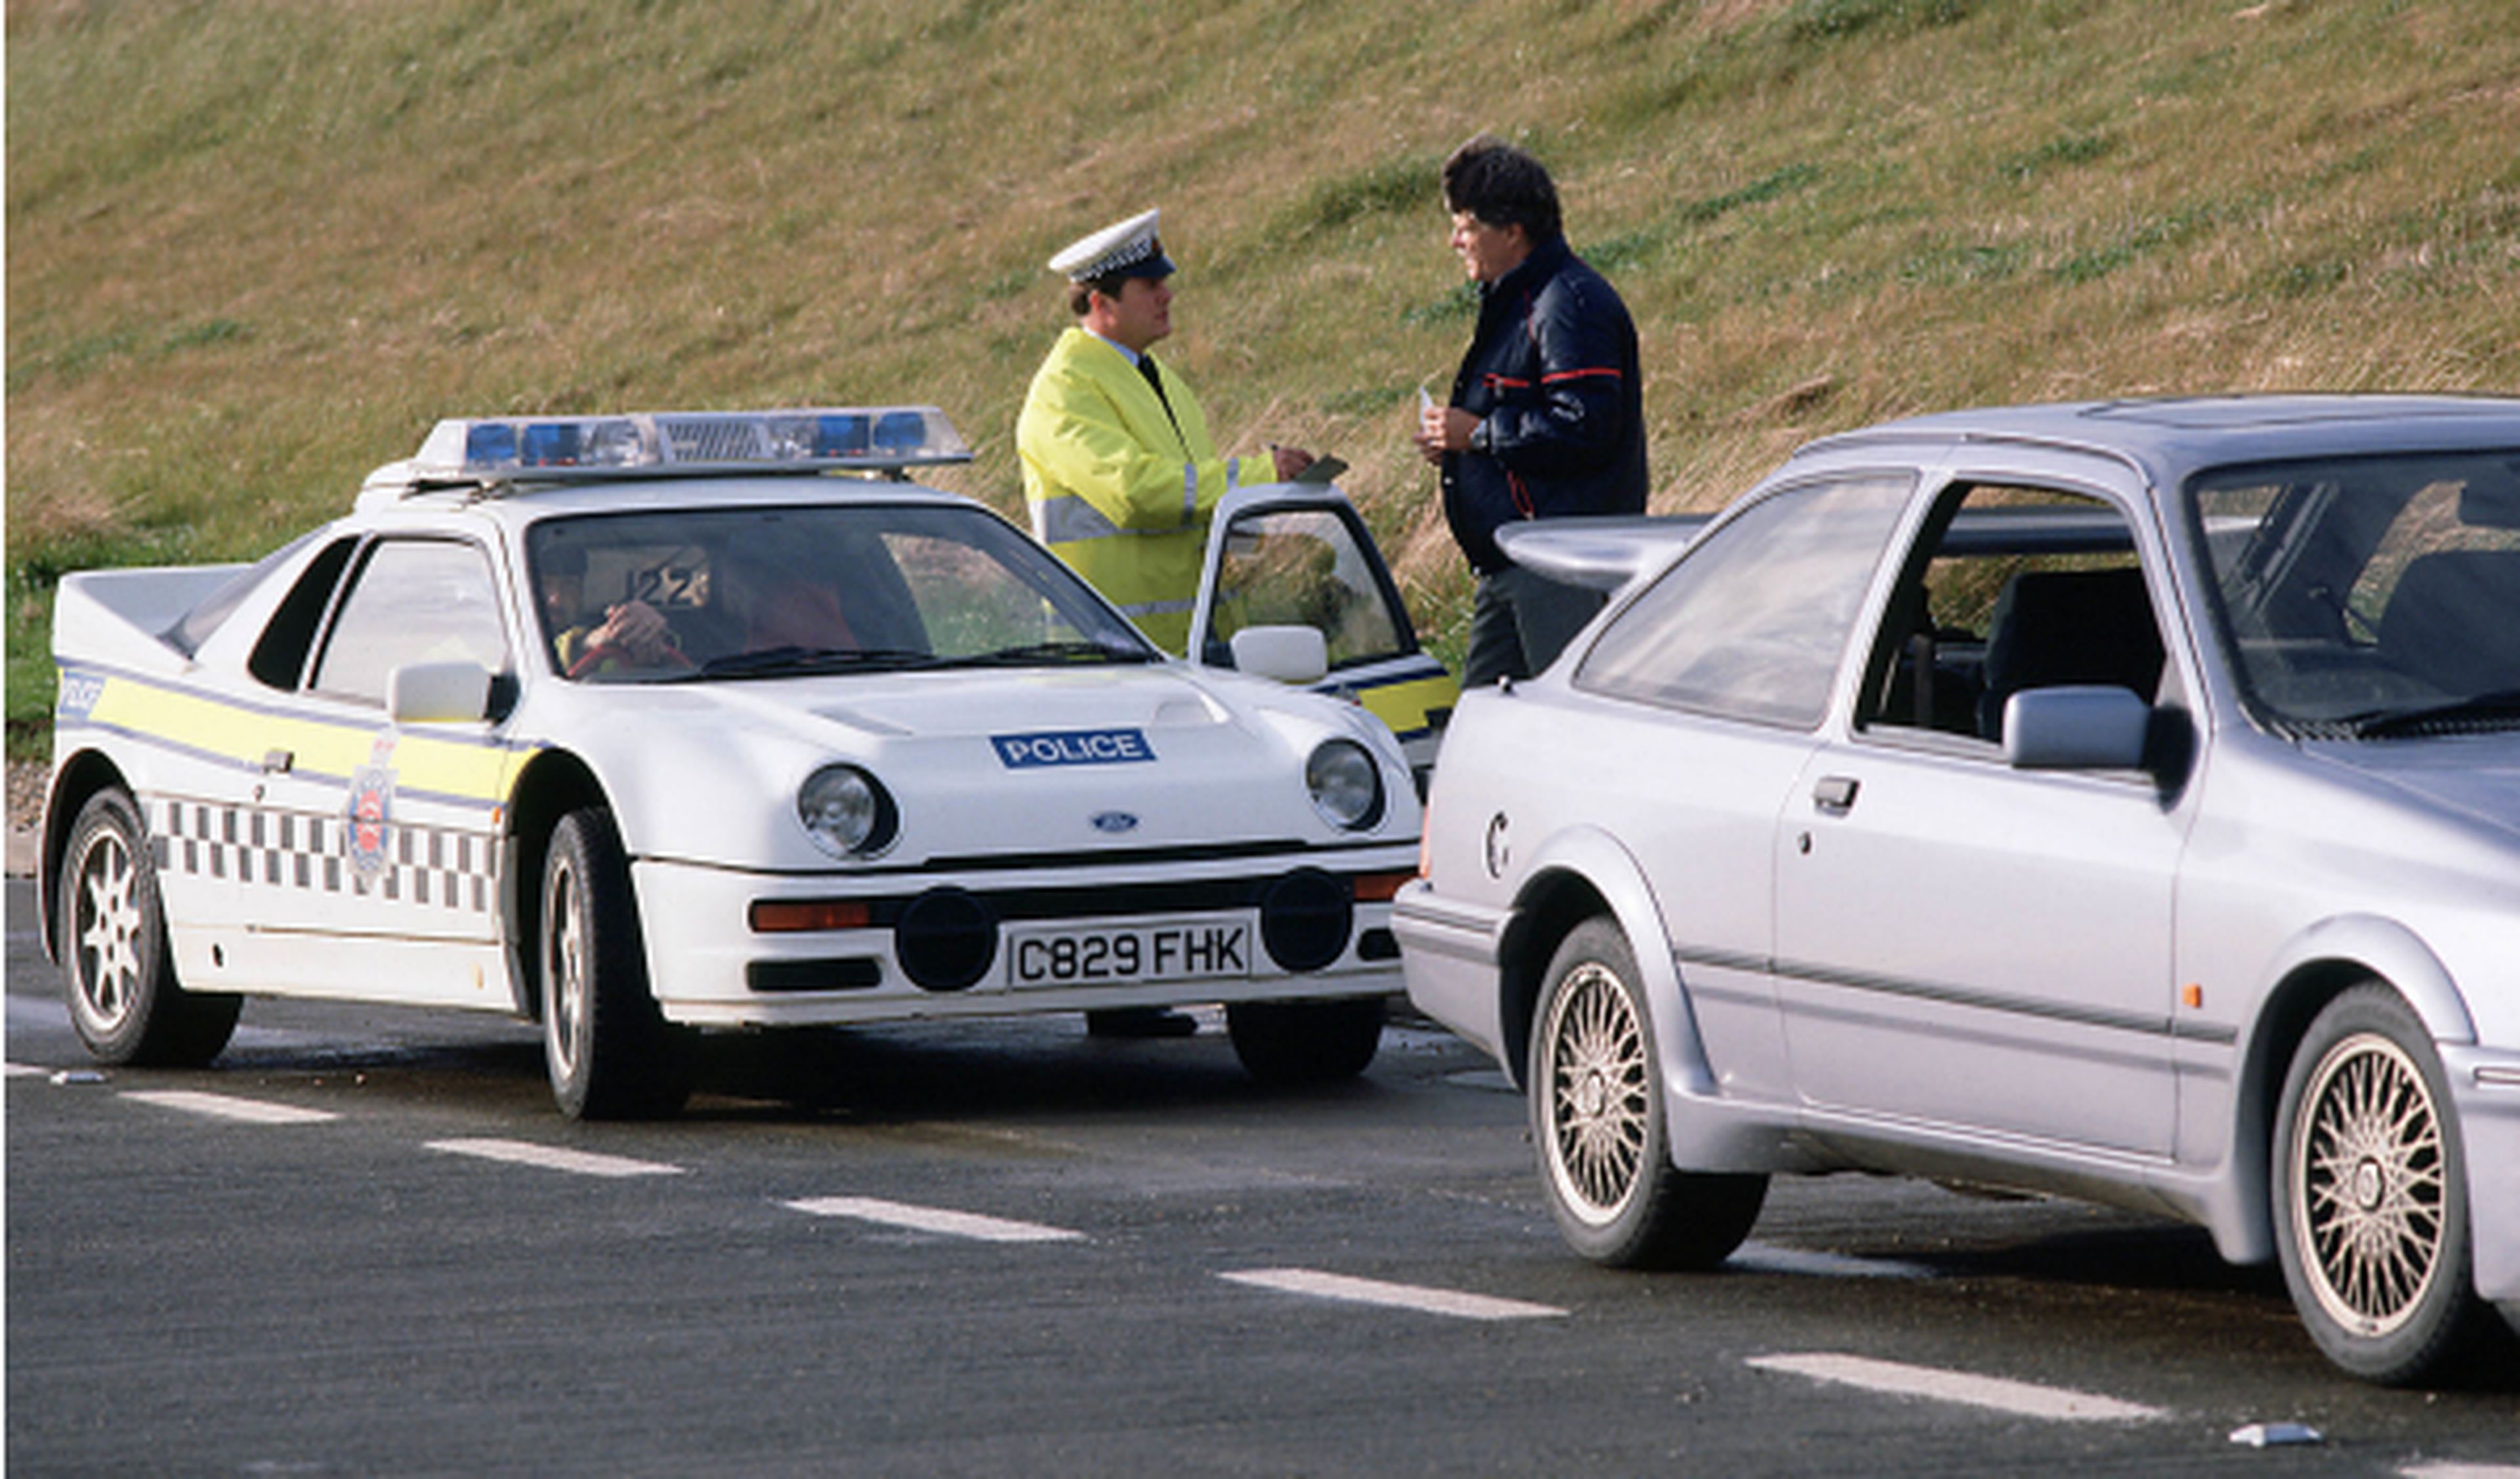 RS200 policia